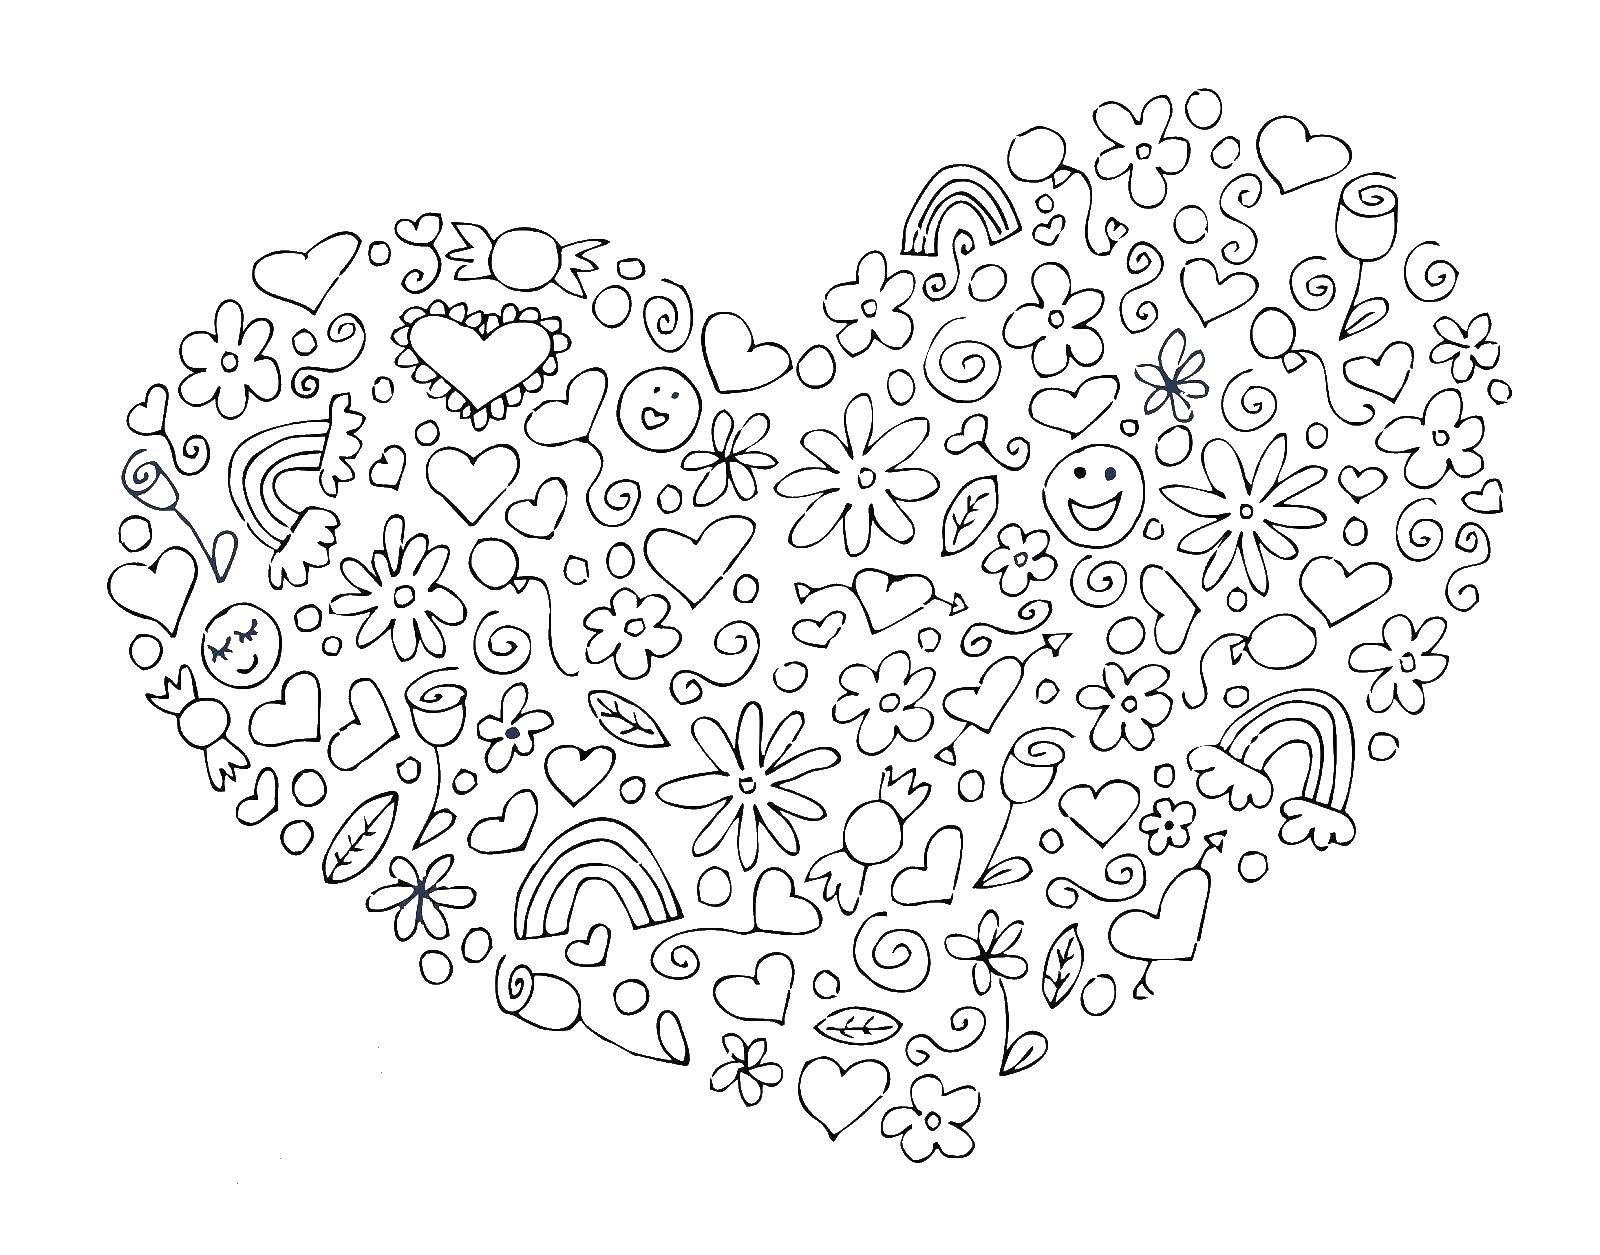 Coloring The heart of the drawings. Category Hearts. Tags:  heart, form, drawings.